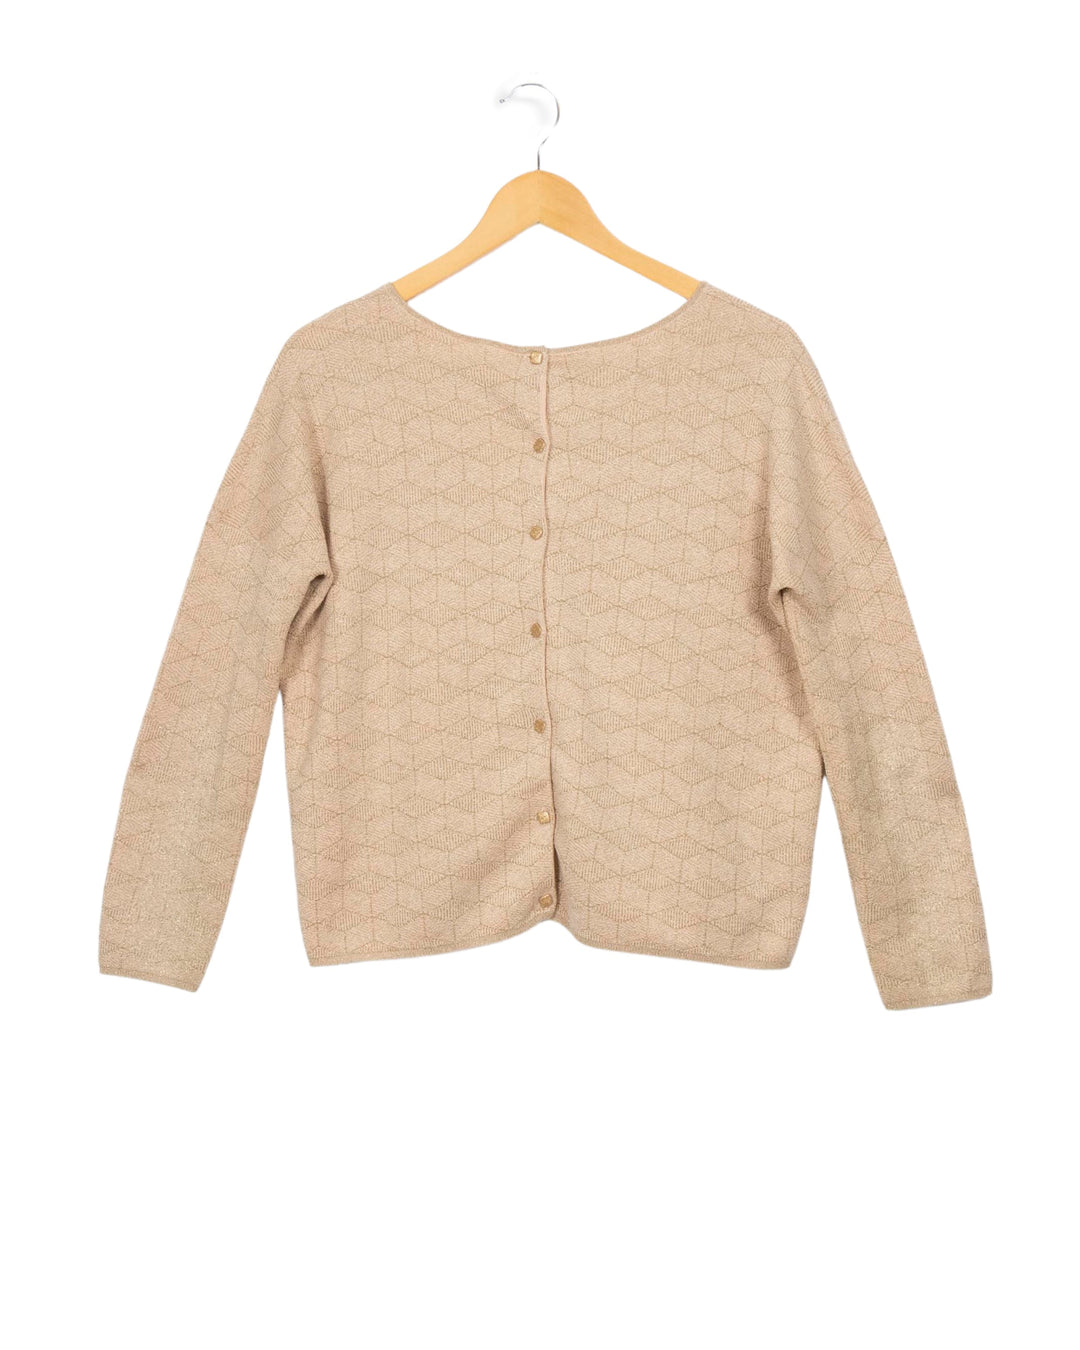 Pink and beige sweater - S